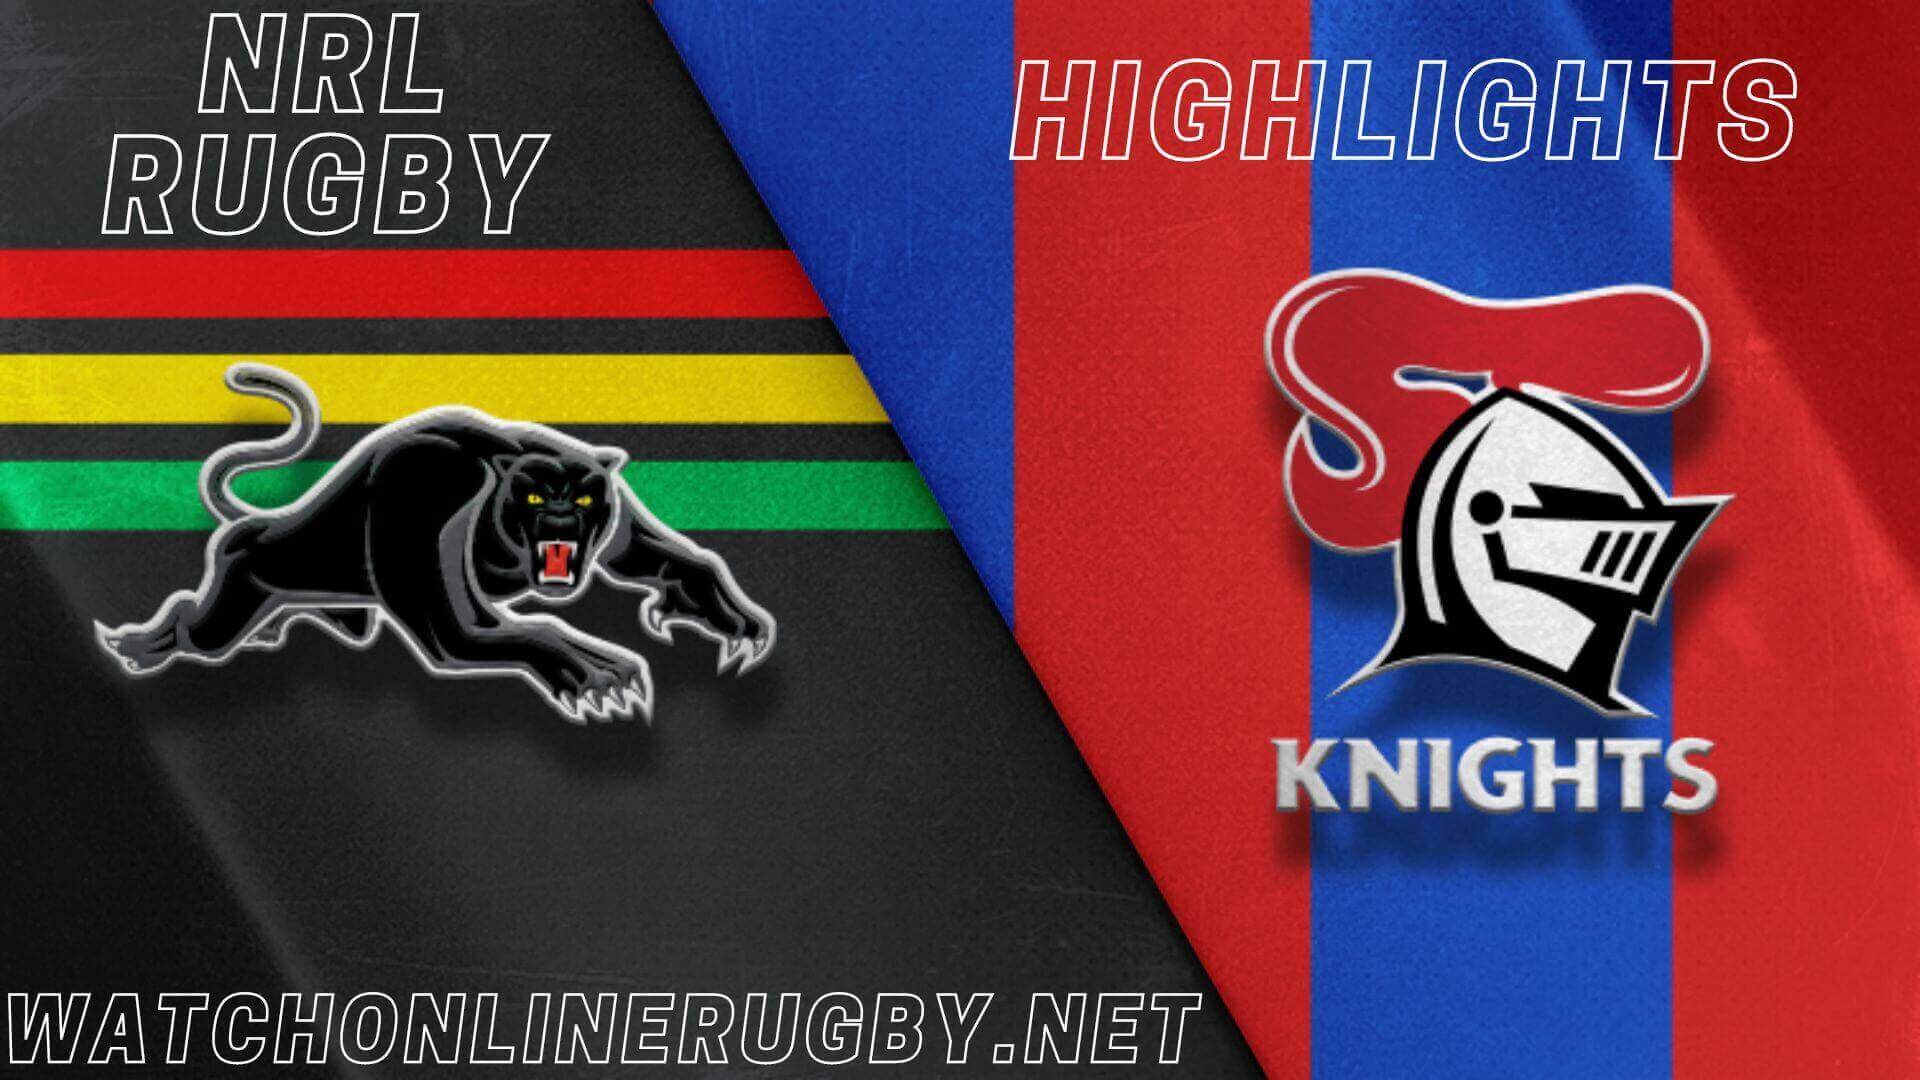 Knights Vs Panthers Highlights RD 14 NRL Rugby